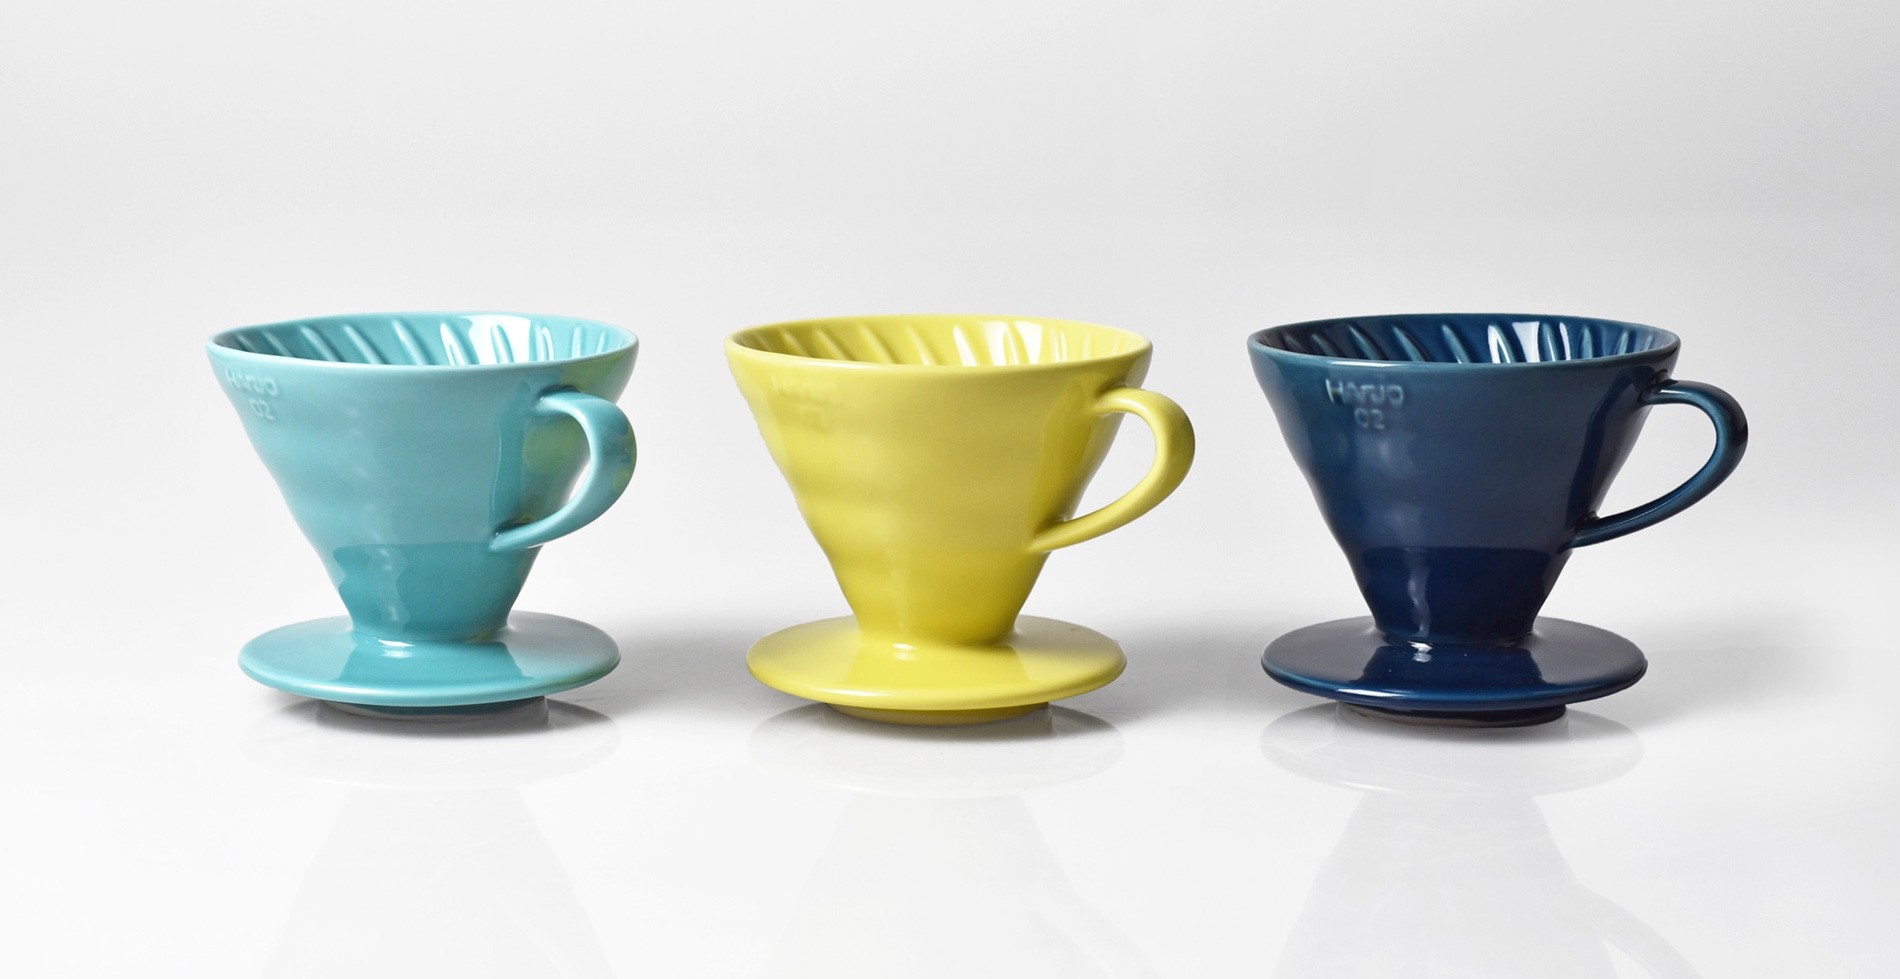 The Coffee Officina Hario V60 Ceramic Dripper Turquoise Yellow and Indigo Blue